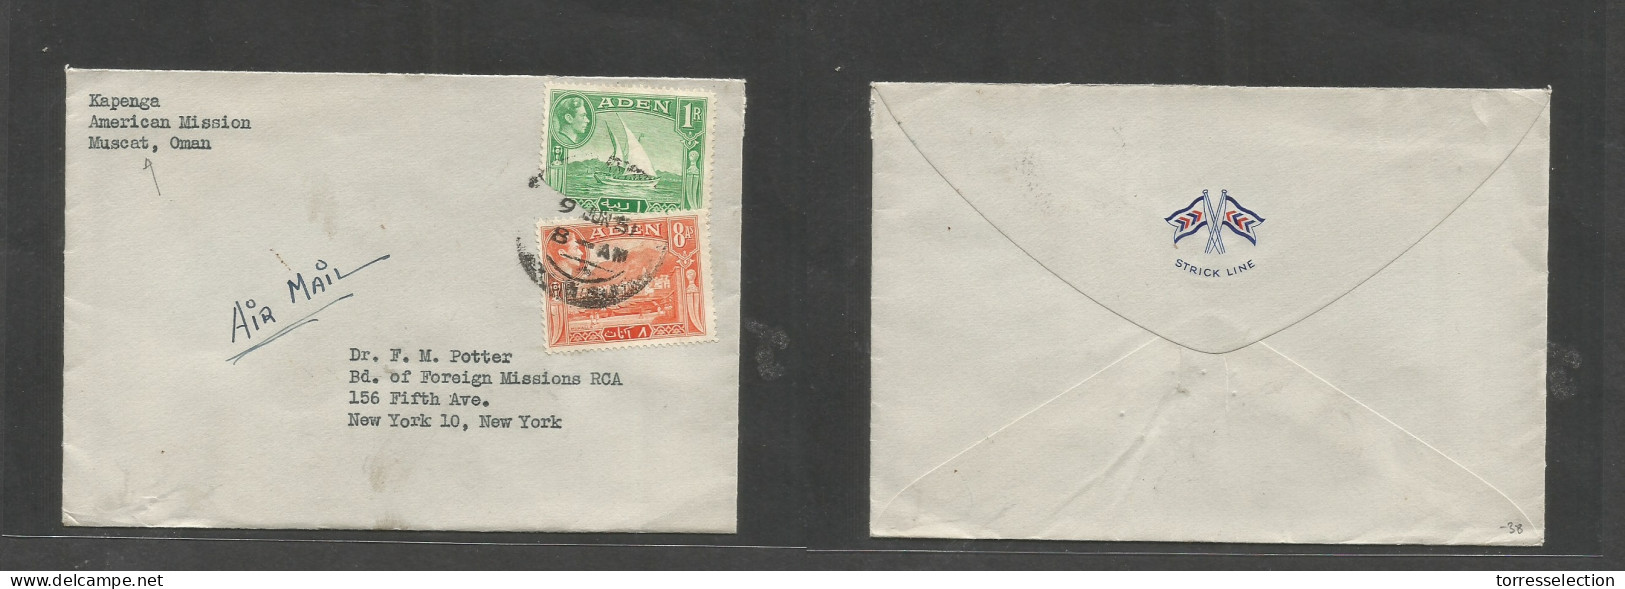 OMAN. 1951 (9 June) American Mission, Muscat - USA, NYC. Air Multifkd Envelope With Aden Stamps At 1rs 8a Rate, Cancelle - Omán